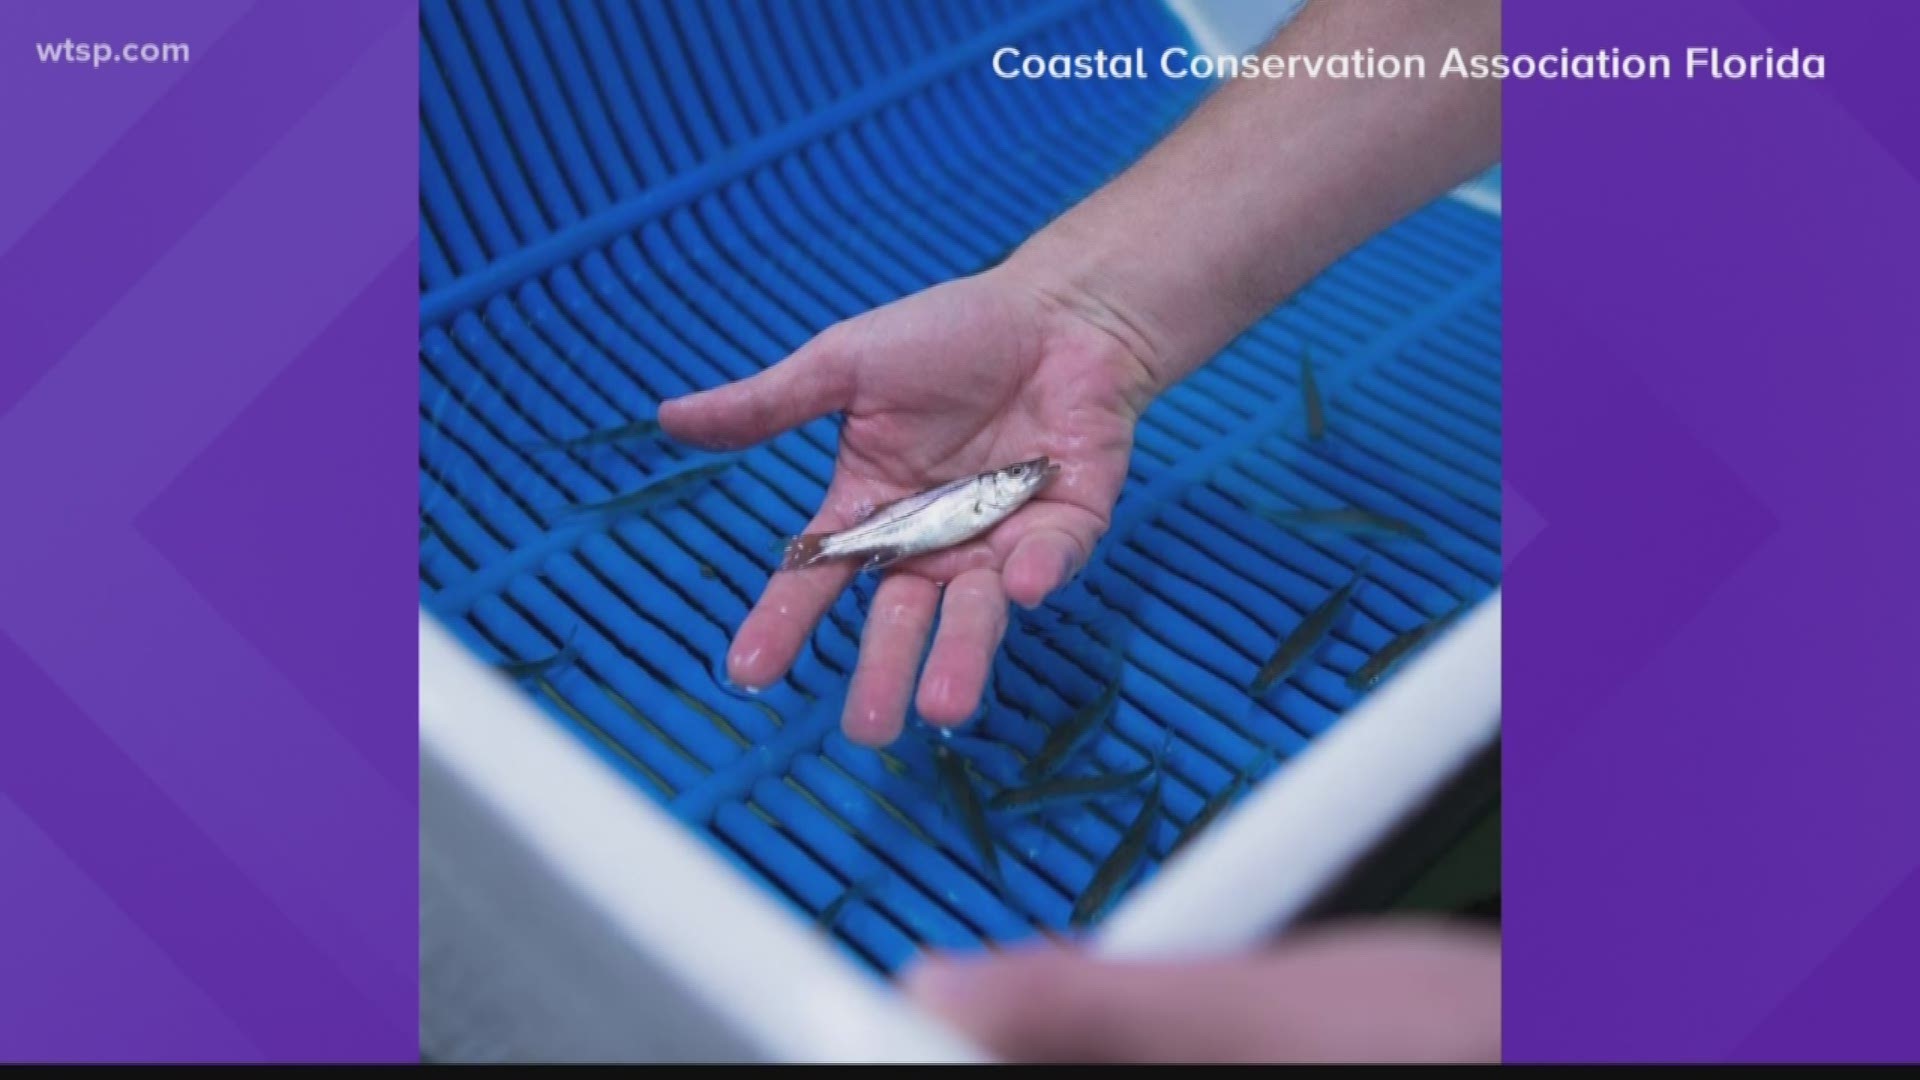 More than 16,000 young and adult redfish are slated for release into the Gulf of Mexico and Tampa Bay after one of the worst outbreaks of red tide killed hundreds of thousands of tons of marine life.